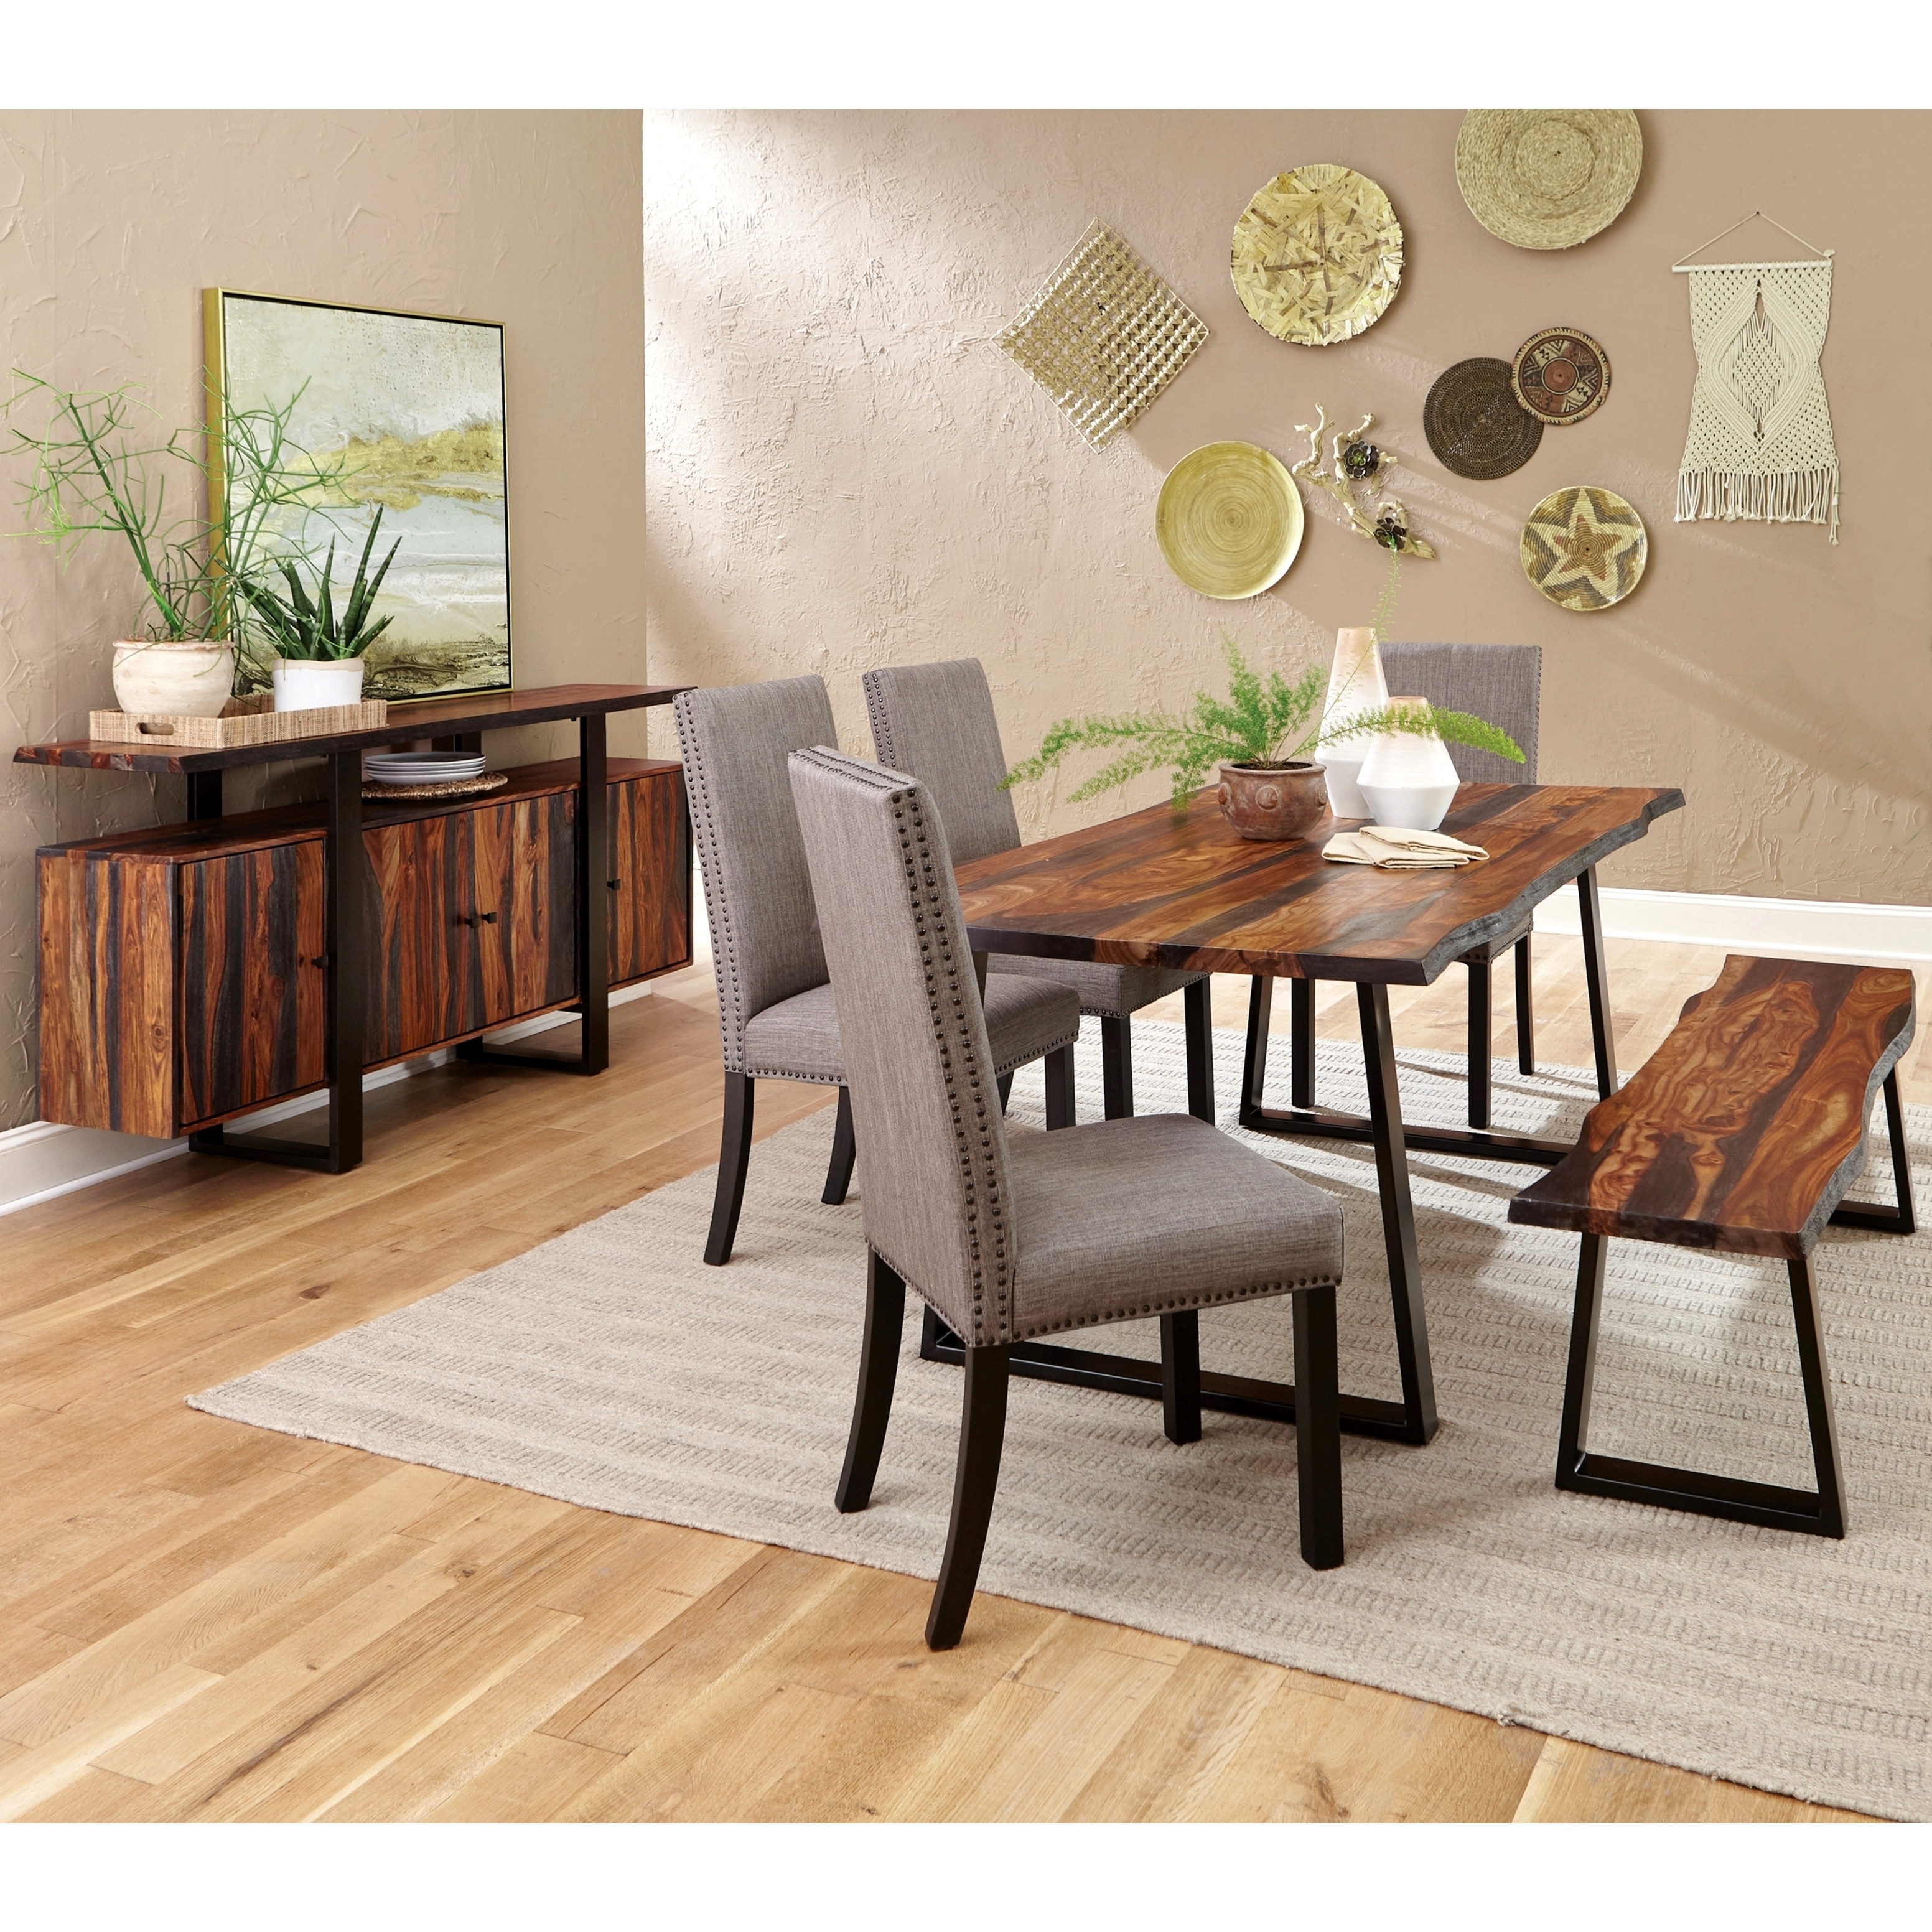 Live Edge Wood And Metal Dining Set With Grey Upholstered Chairs And Buffet Server